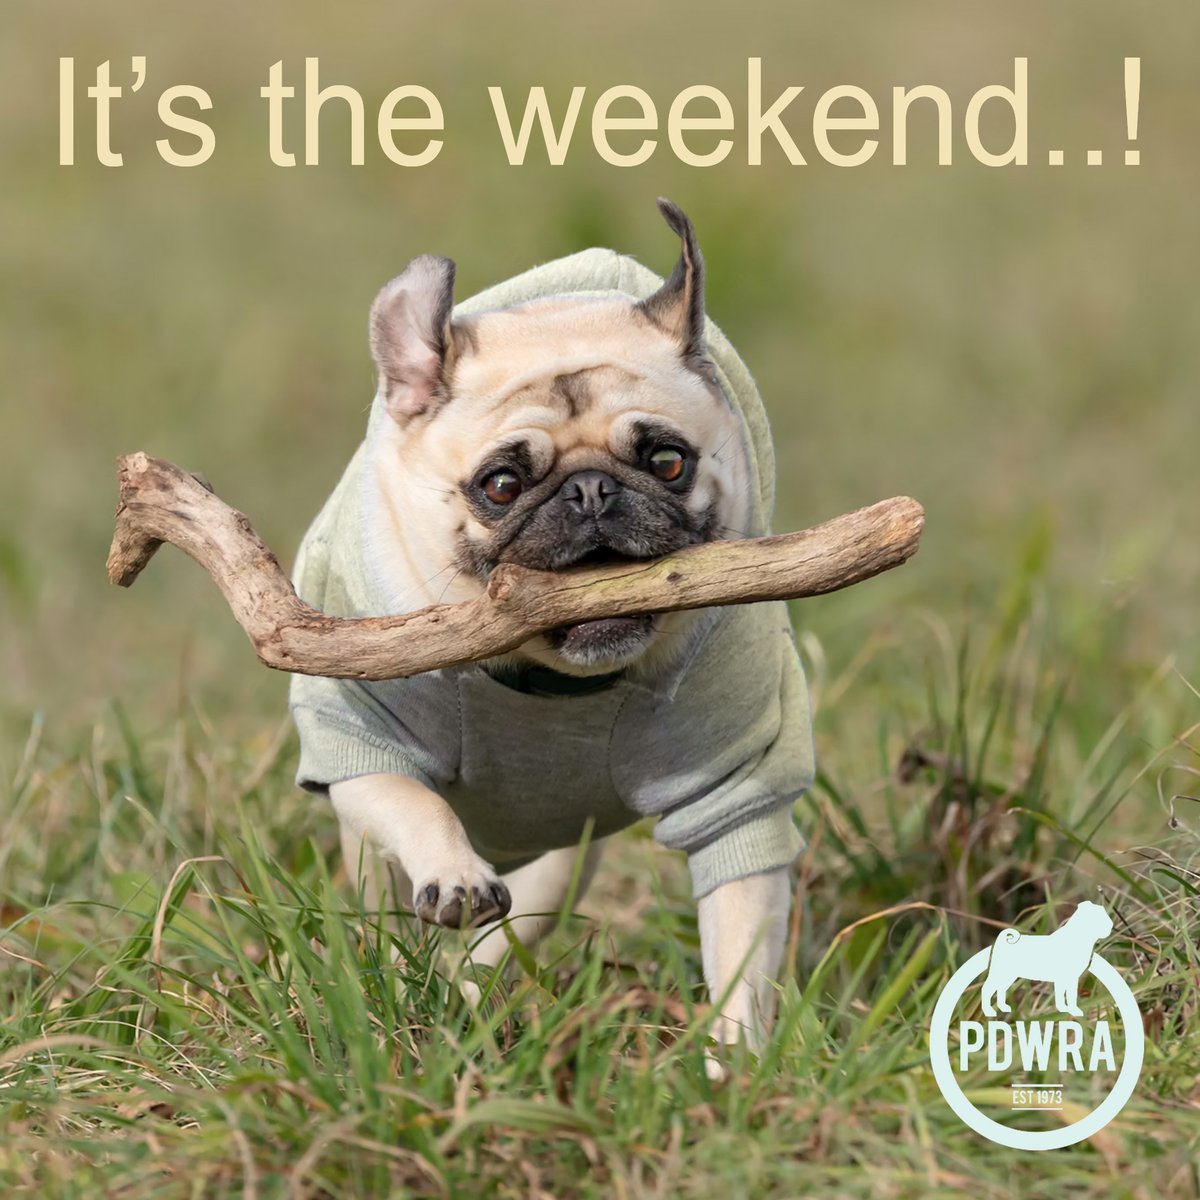 Wishing all of our supporters a wonderful long weekend, we hope you and your pugs have a lovely break!
ecs.page.link/shjGW
#pdwra #pugcharity #pugwelfare #friendsofwelfare #easter #pug